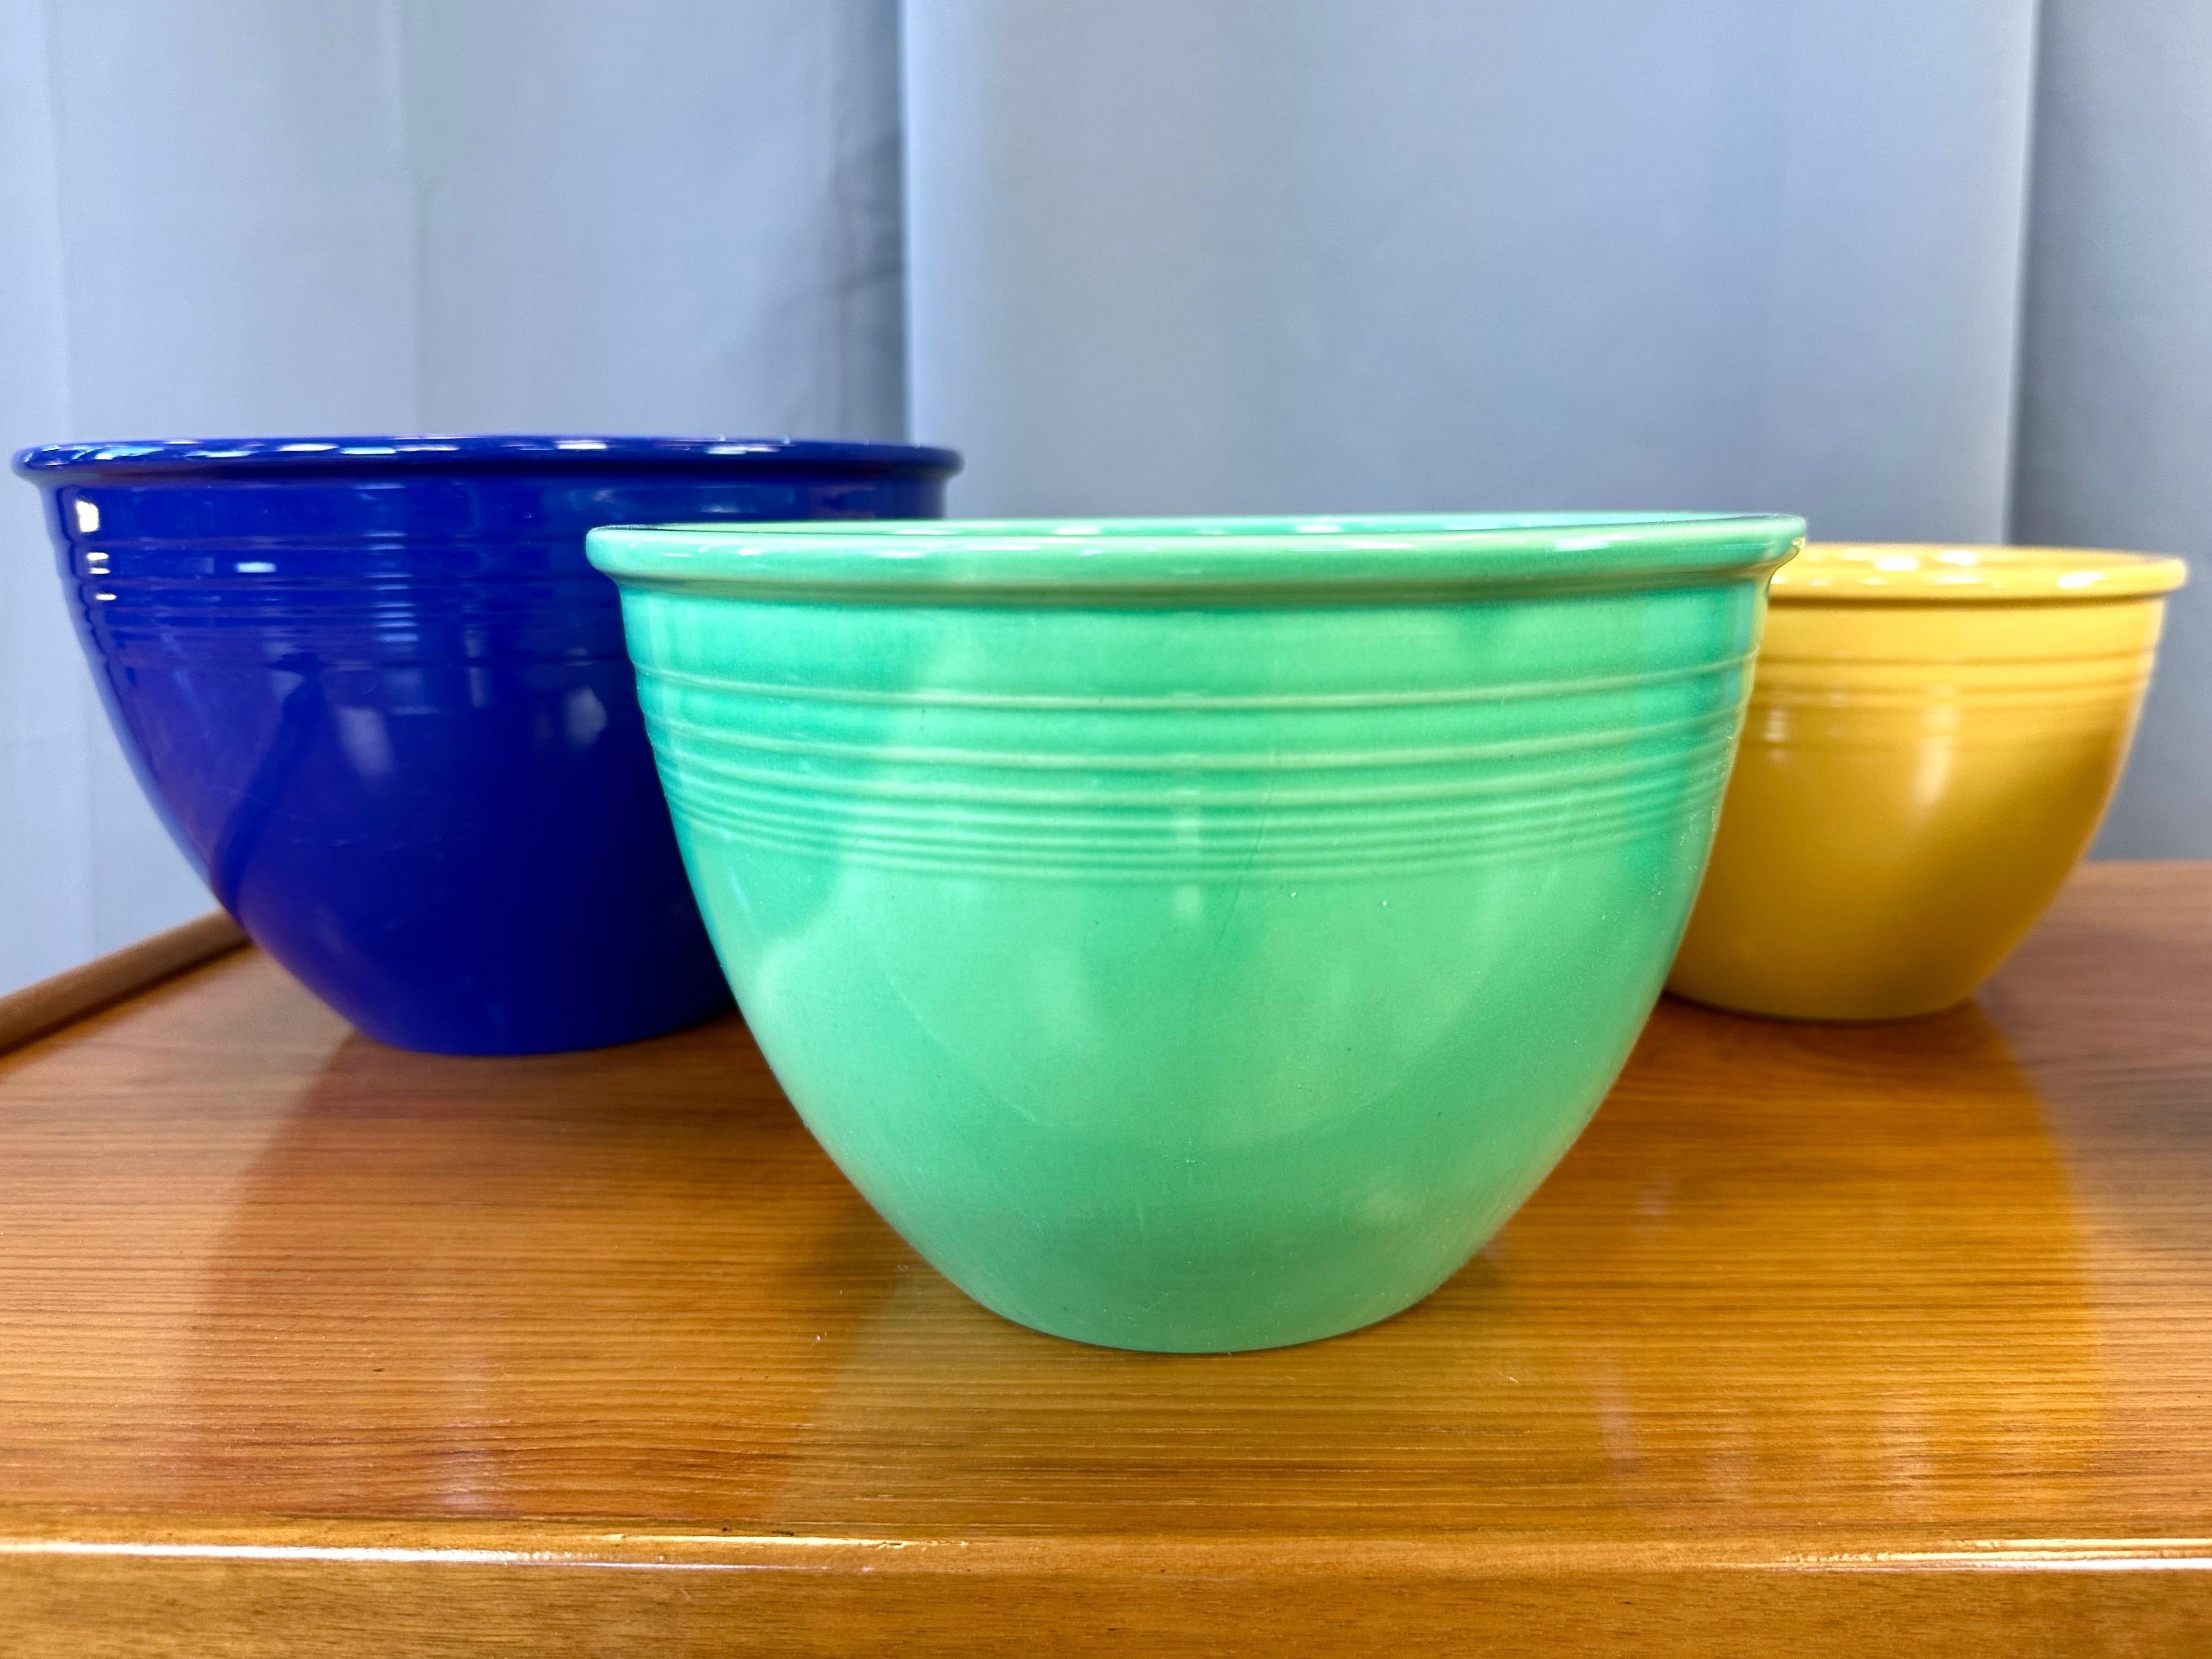 American Early Vintage Fiestaware Nesting Mixing Bowls, Multi-Color Set of Six, c. 1940 For Sale